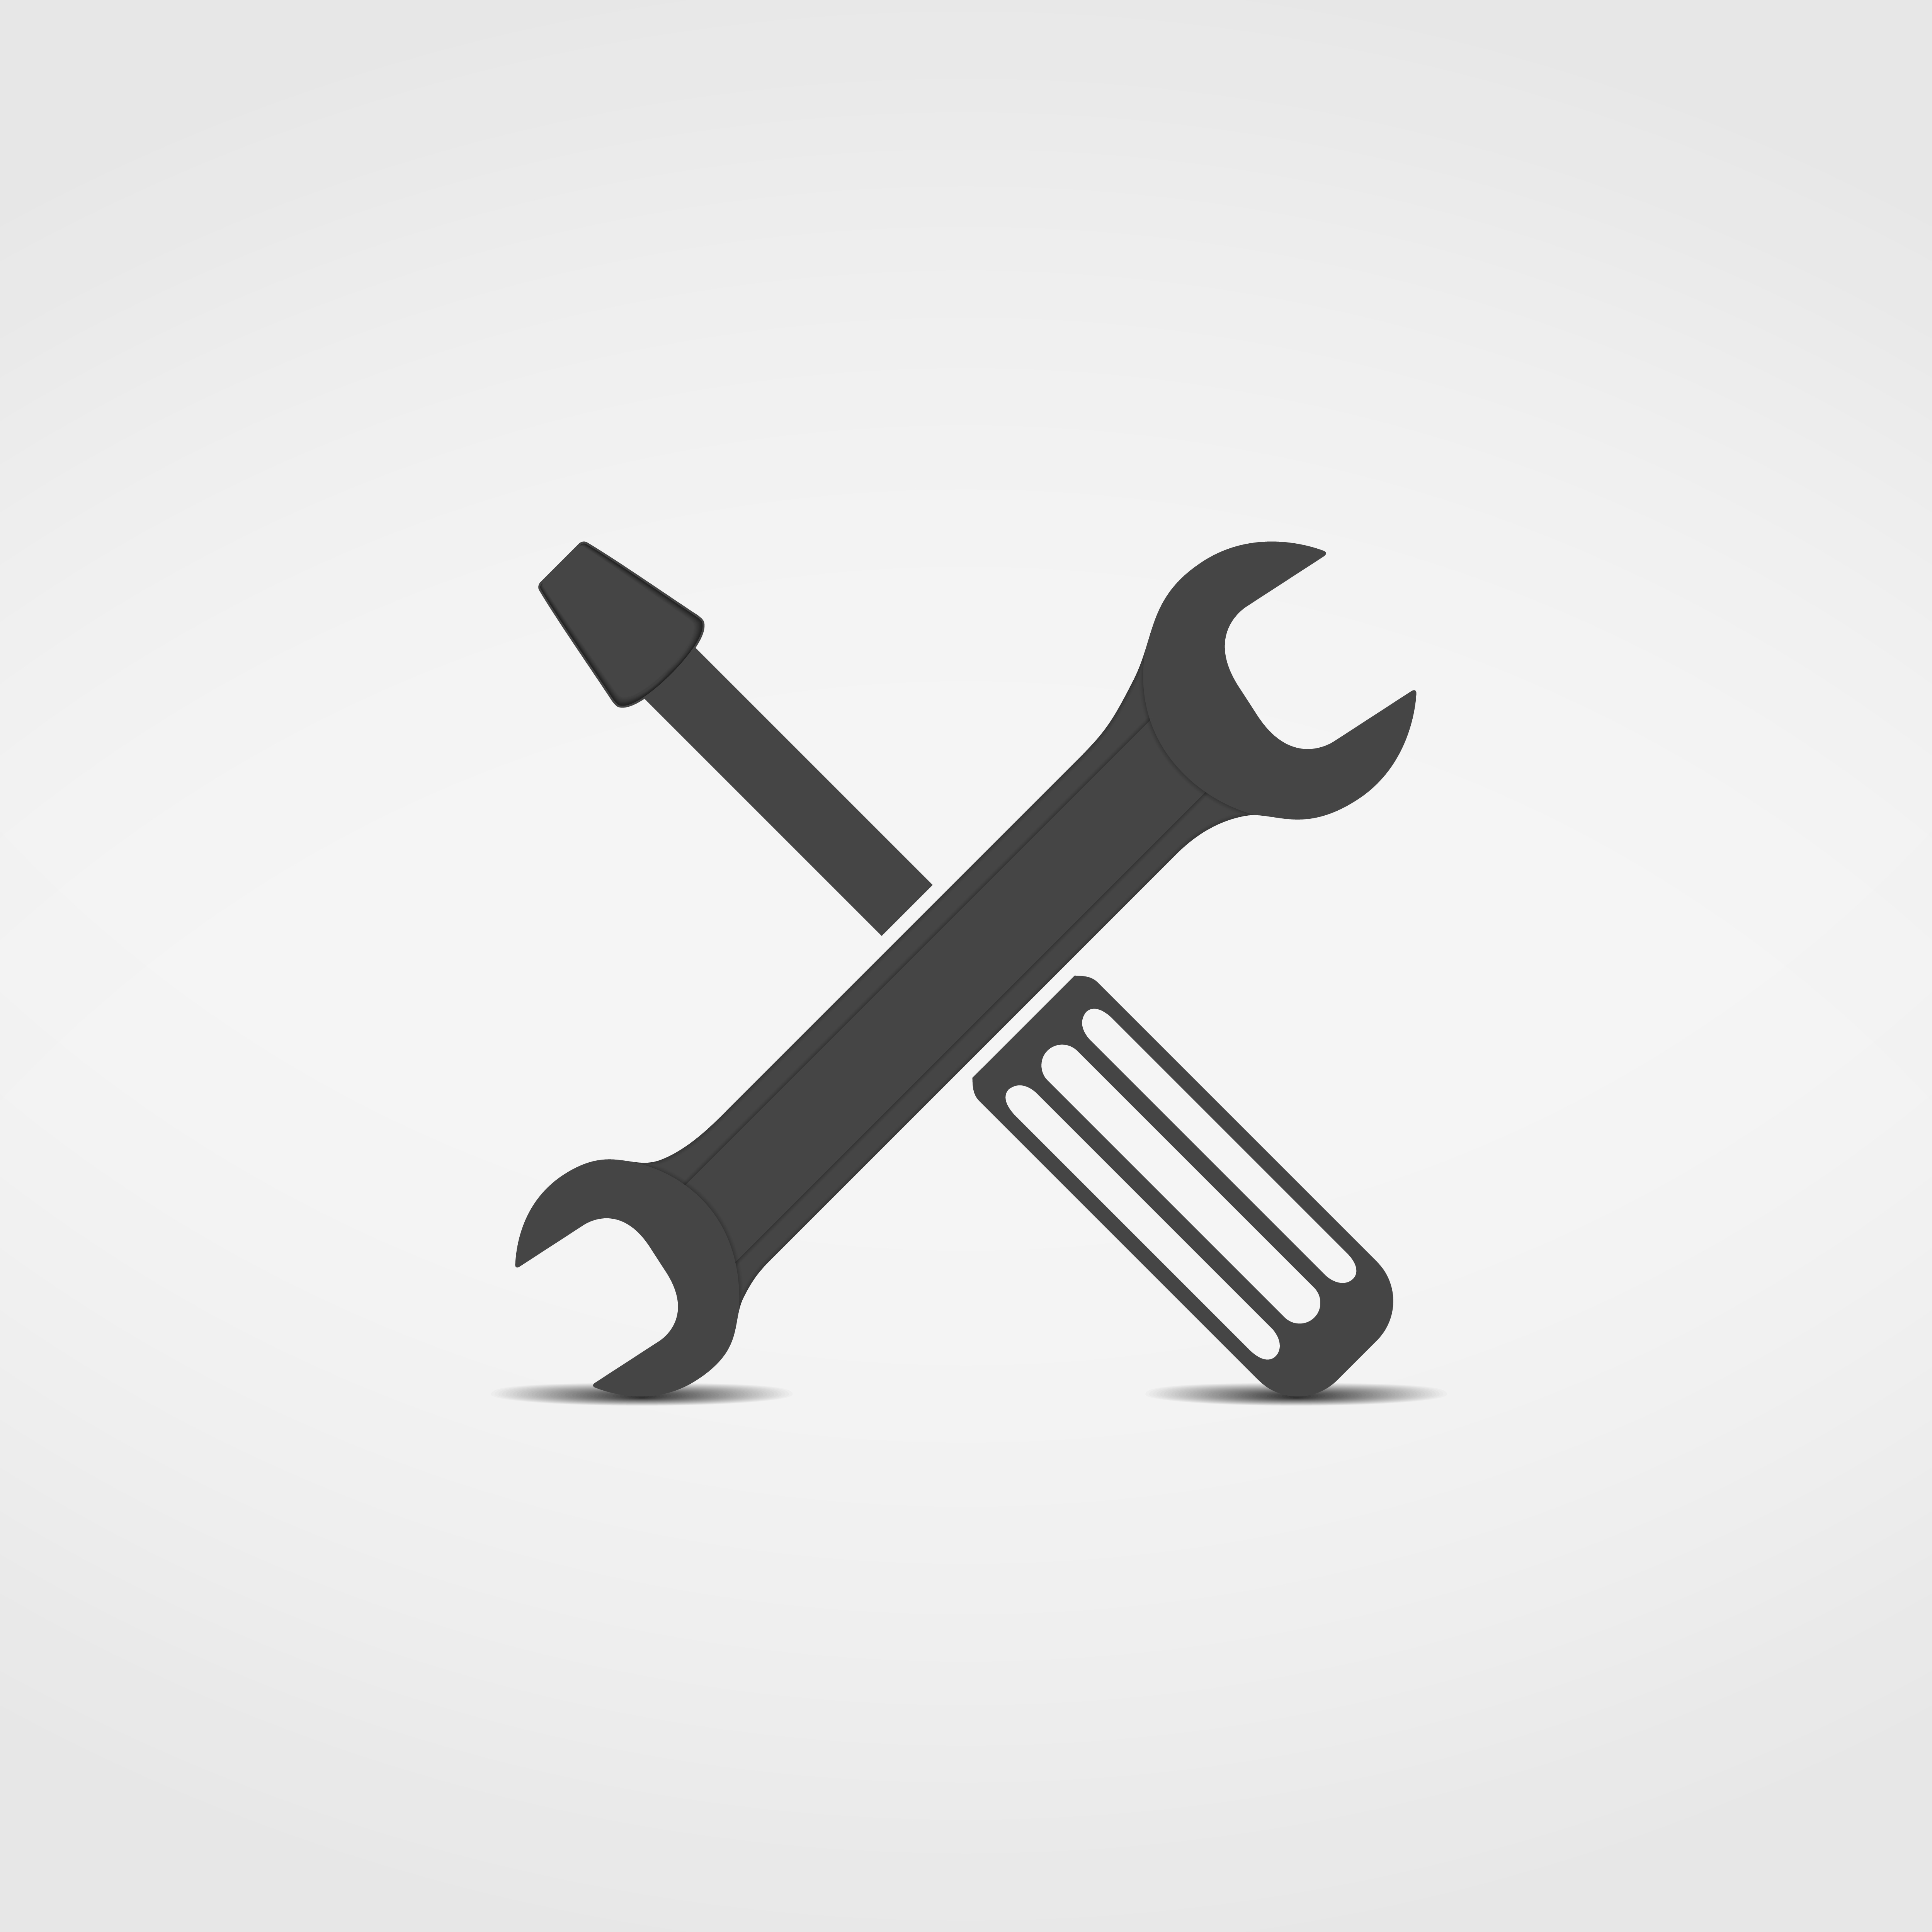 Screwdriver and wrench icon, vector eps10 illustration